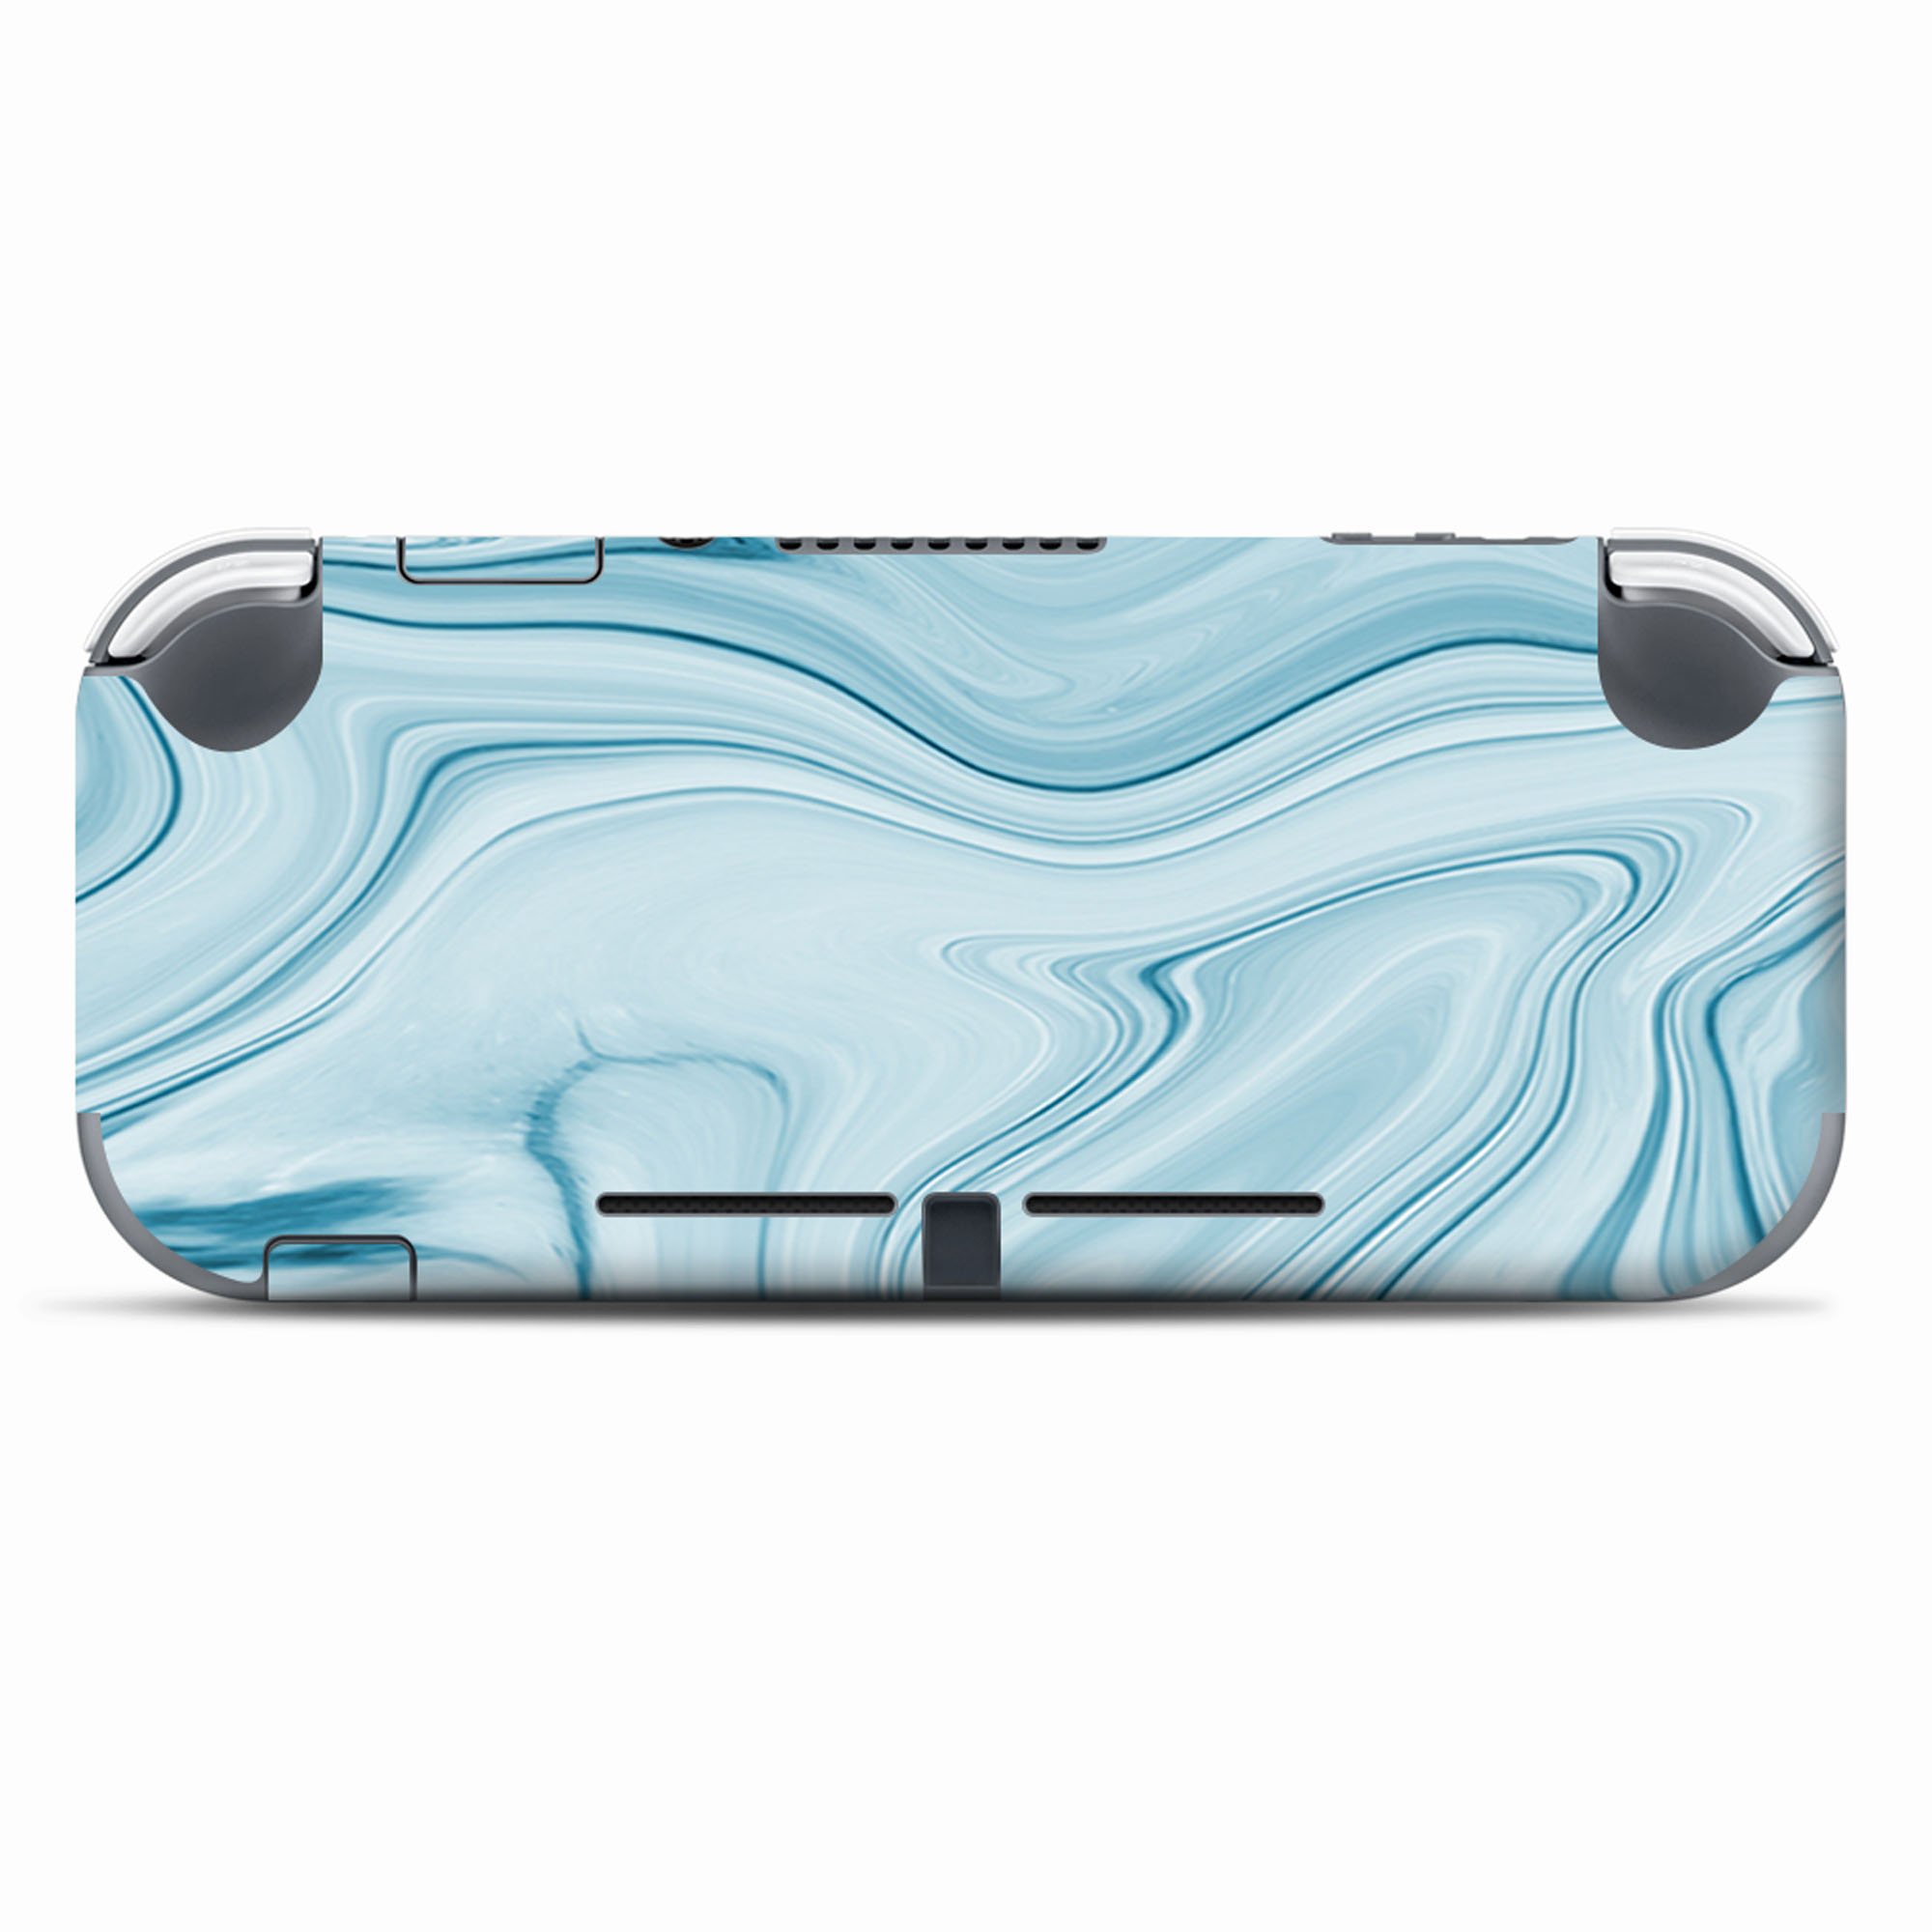 Nintendo Switch Lite Skins Decals Vinyl Wrap  - decal stickers skins cover -Baby Blue Ice Swirl Marble - image 3 of 4